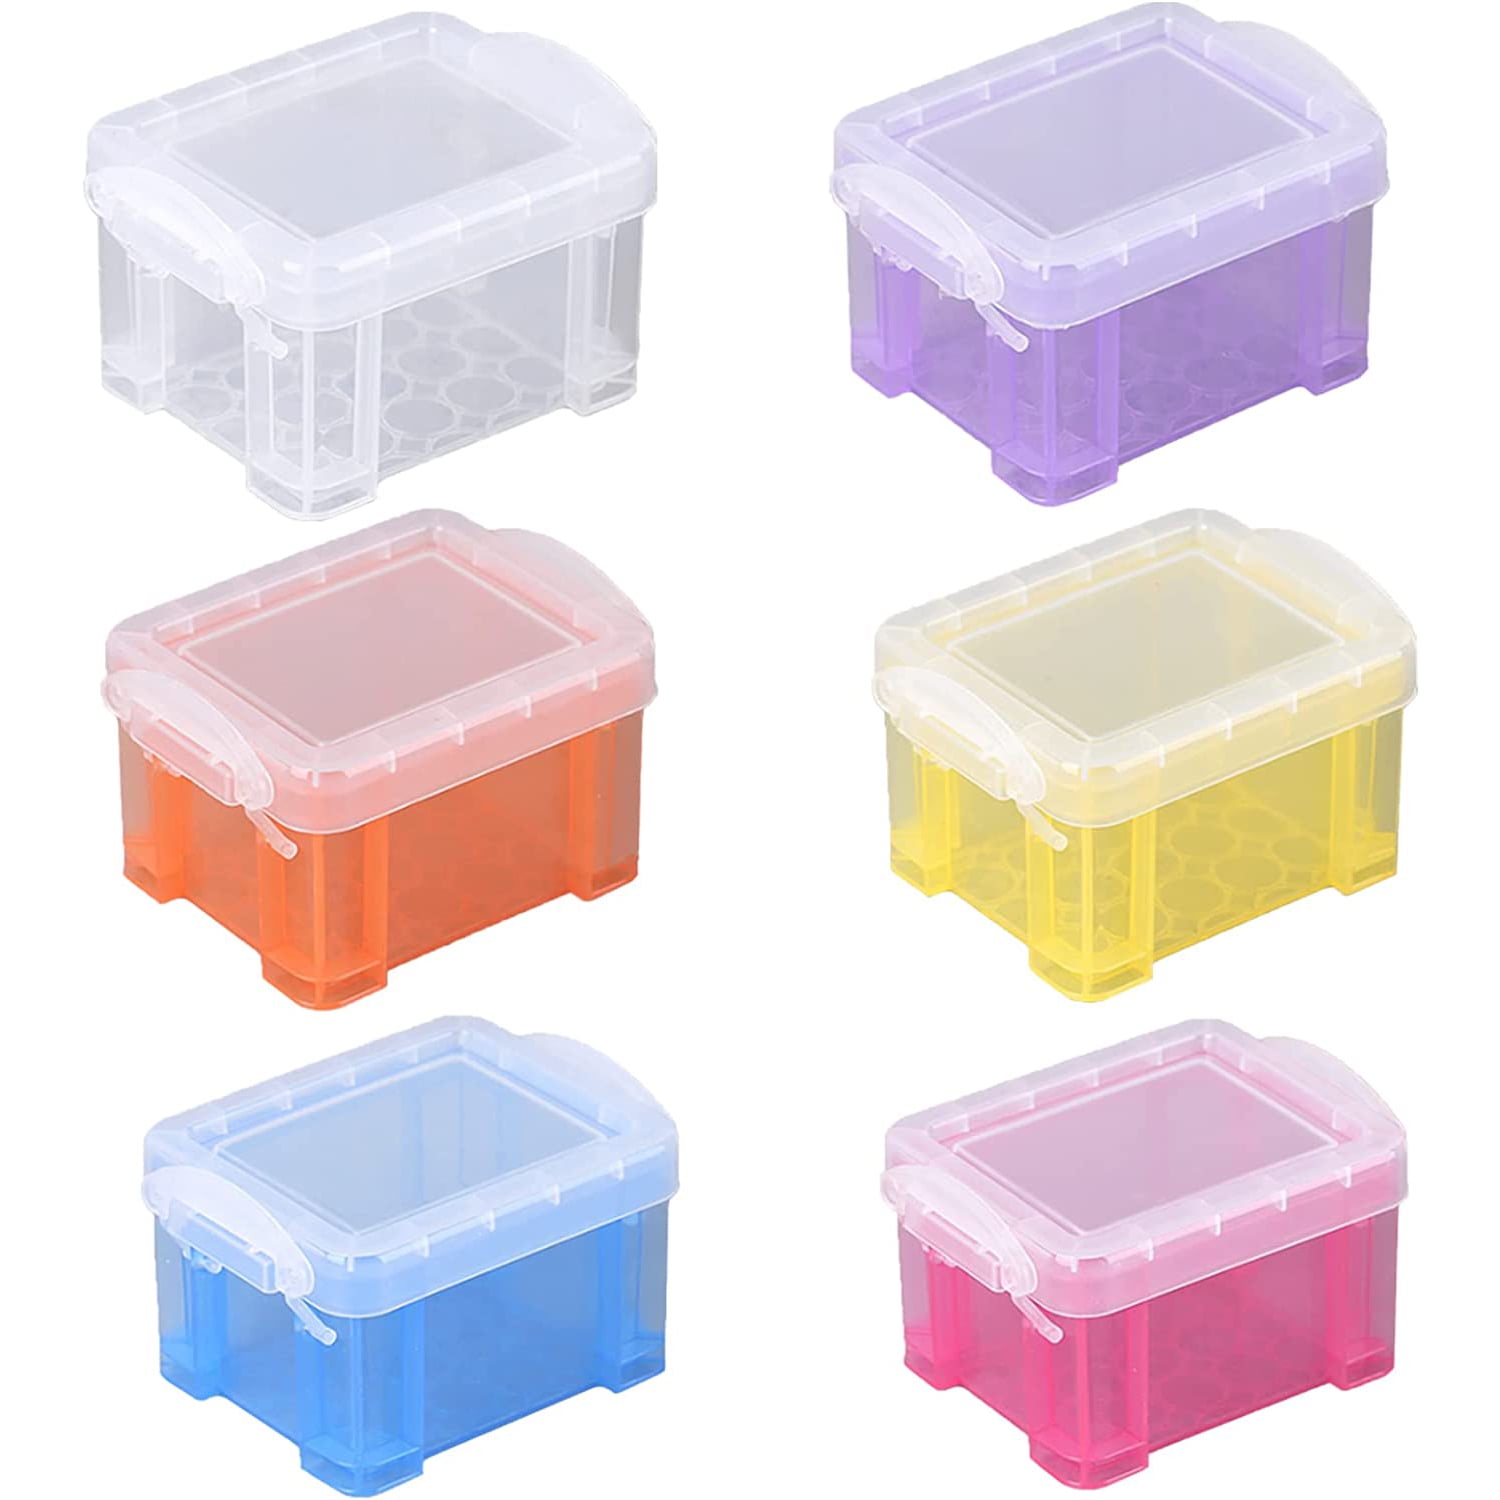  EXCEART 80 Pcs Small to go containers with lids Small Plastic  Container Small containers Small Bead containers Small Jewelry case Desk  Organizers Drawers Accessories Container Box